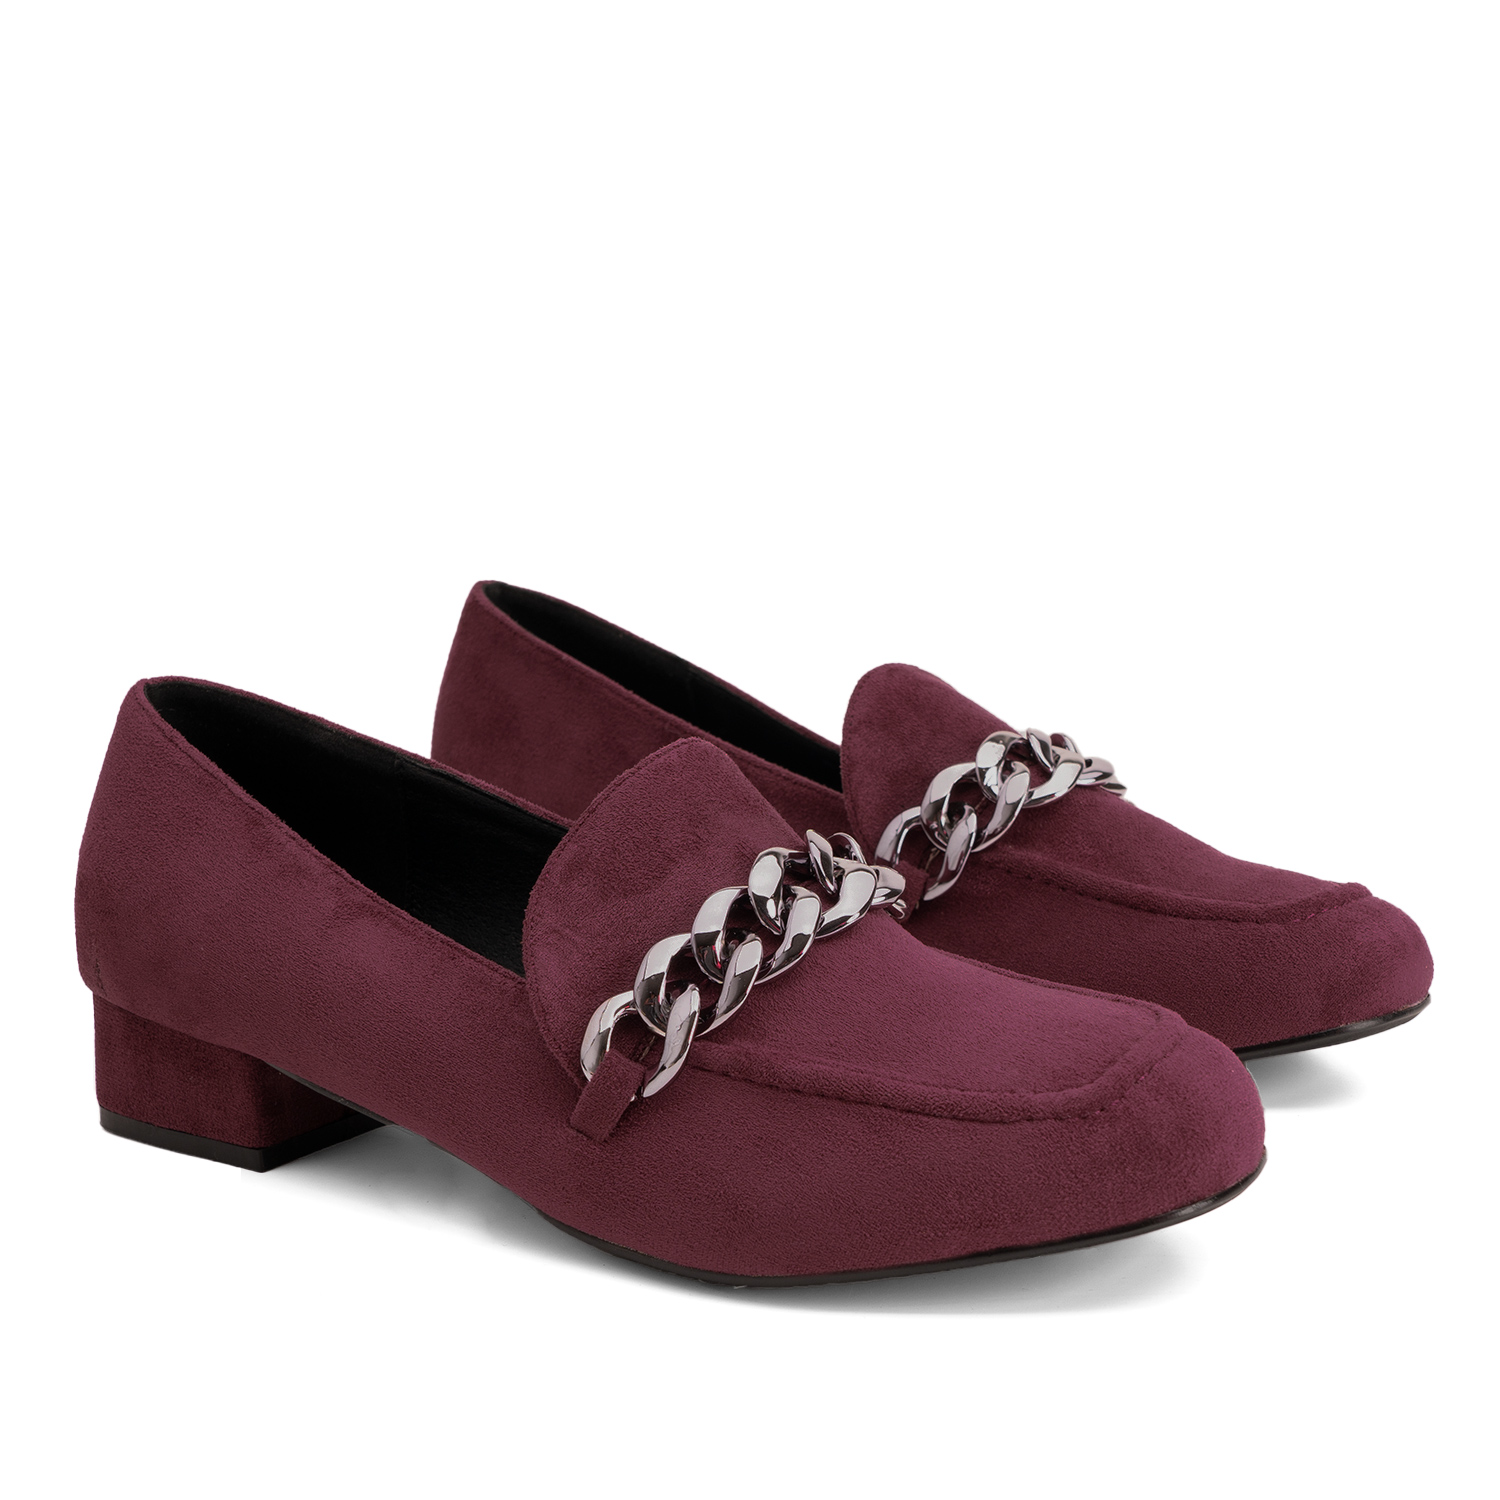 Moccasins in bordeaux faux suede with chain link detail 